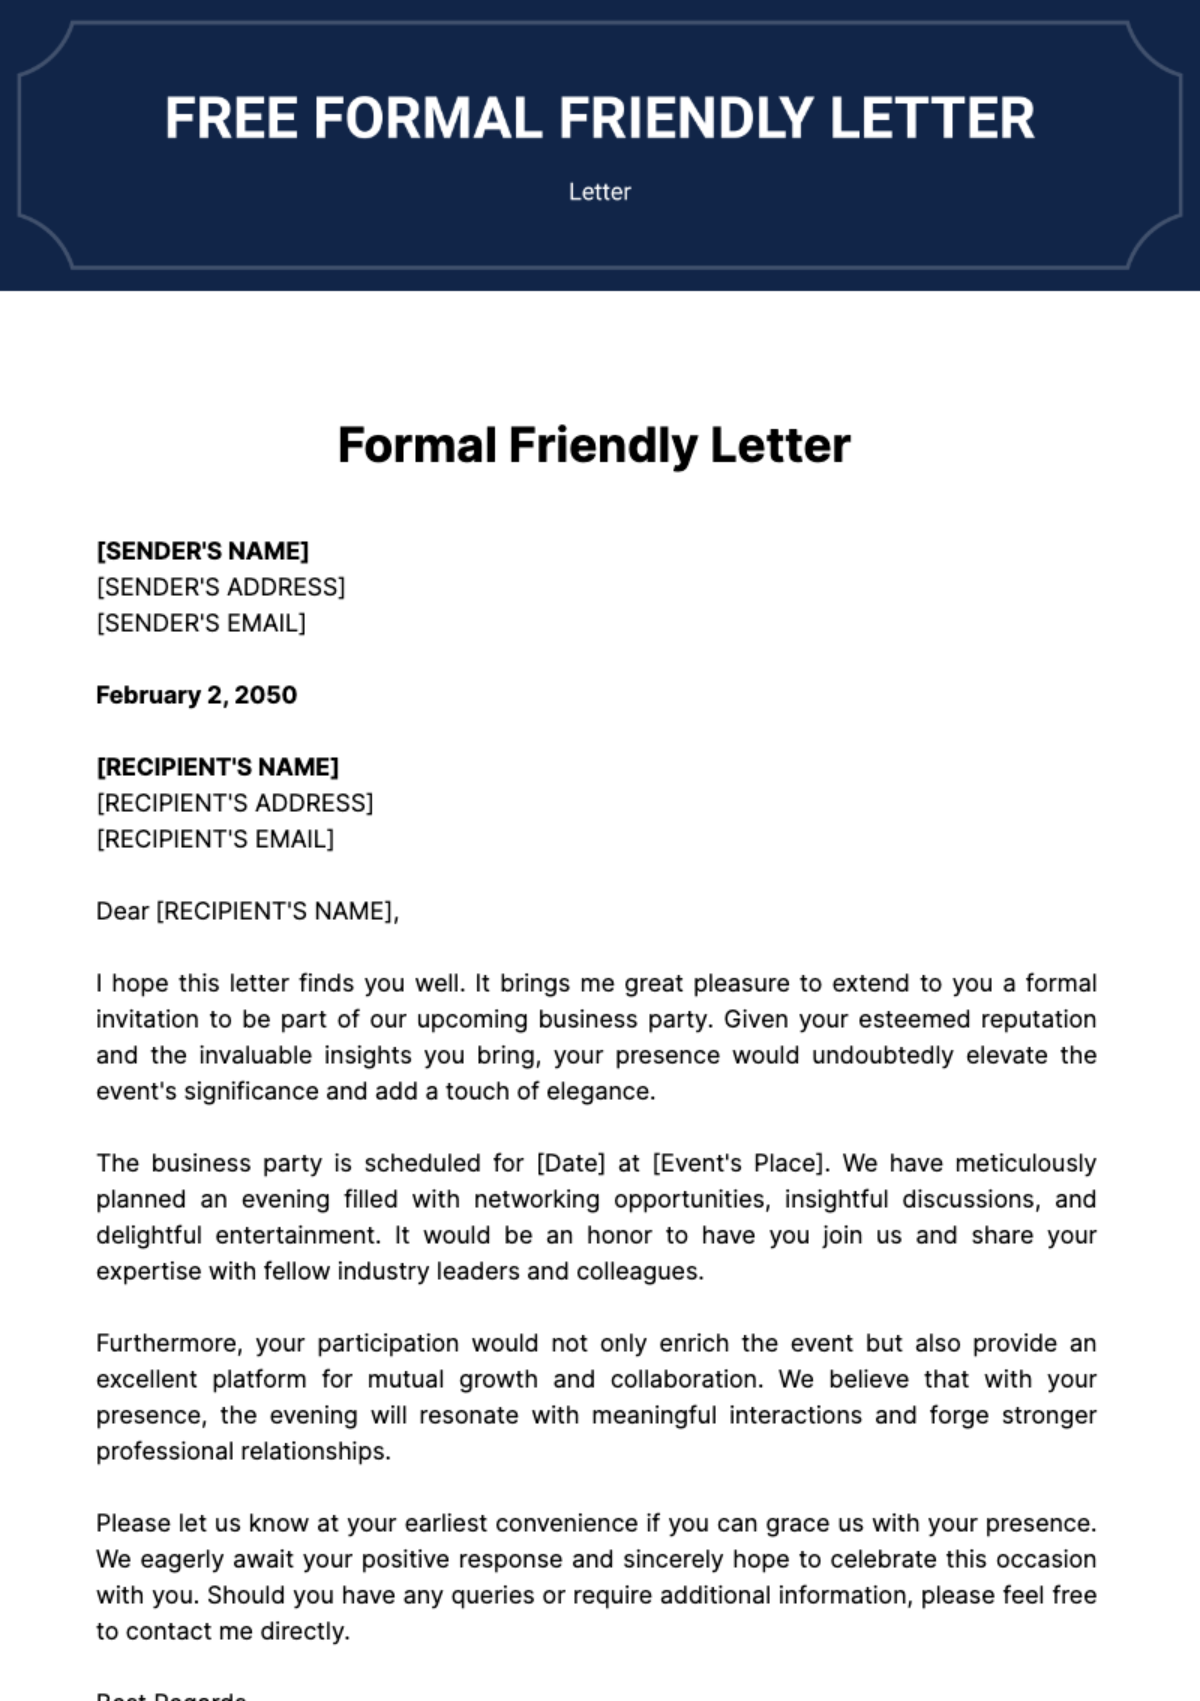 Free Formal Friendly Letter Template